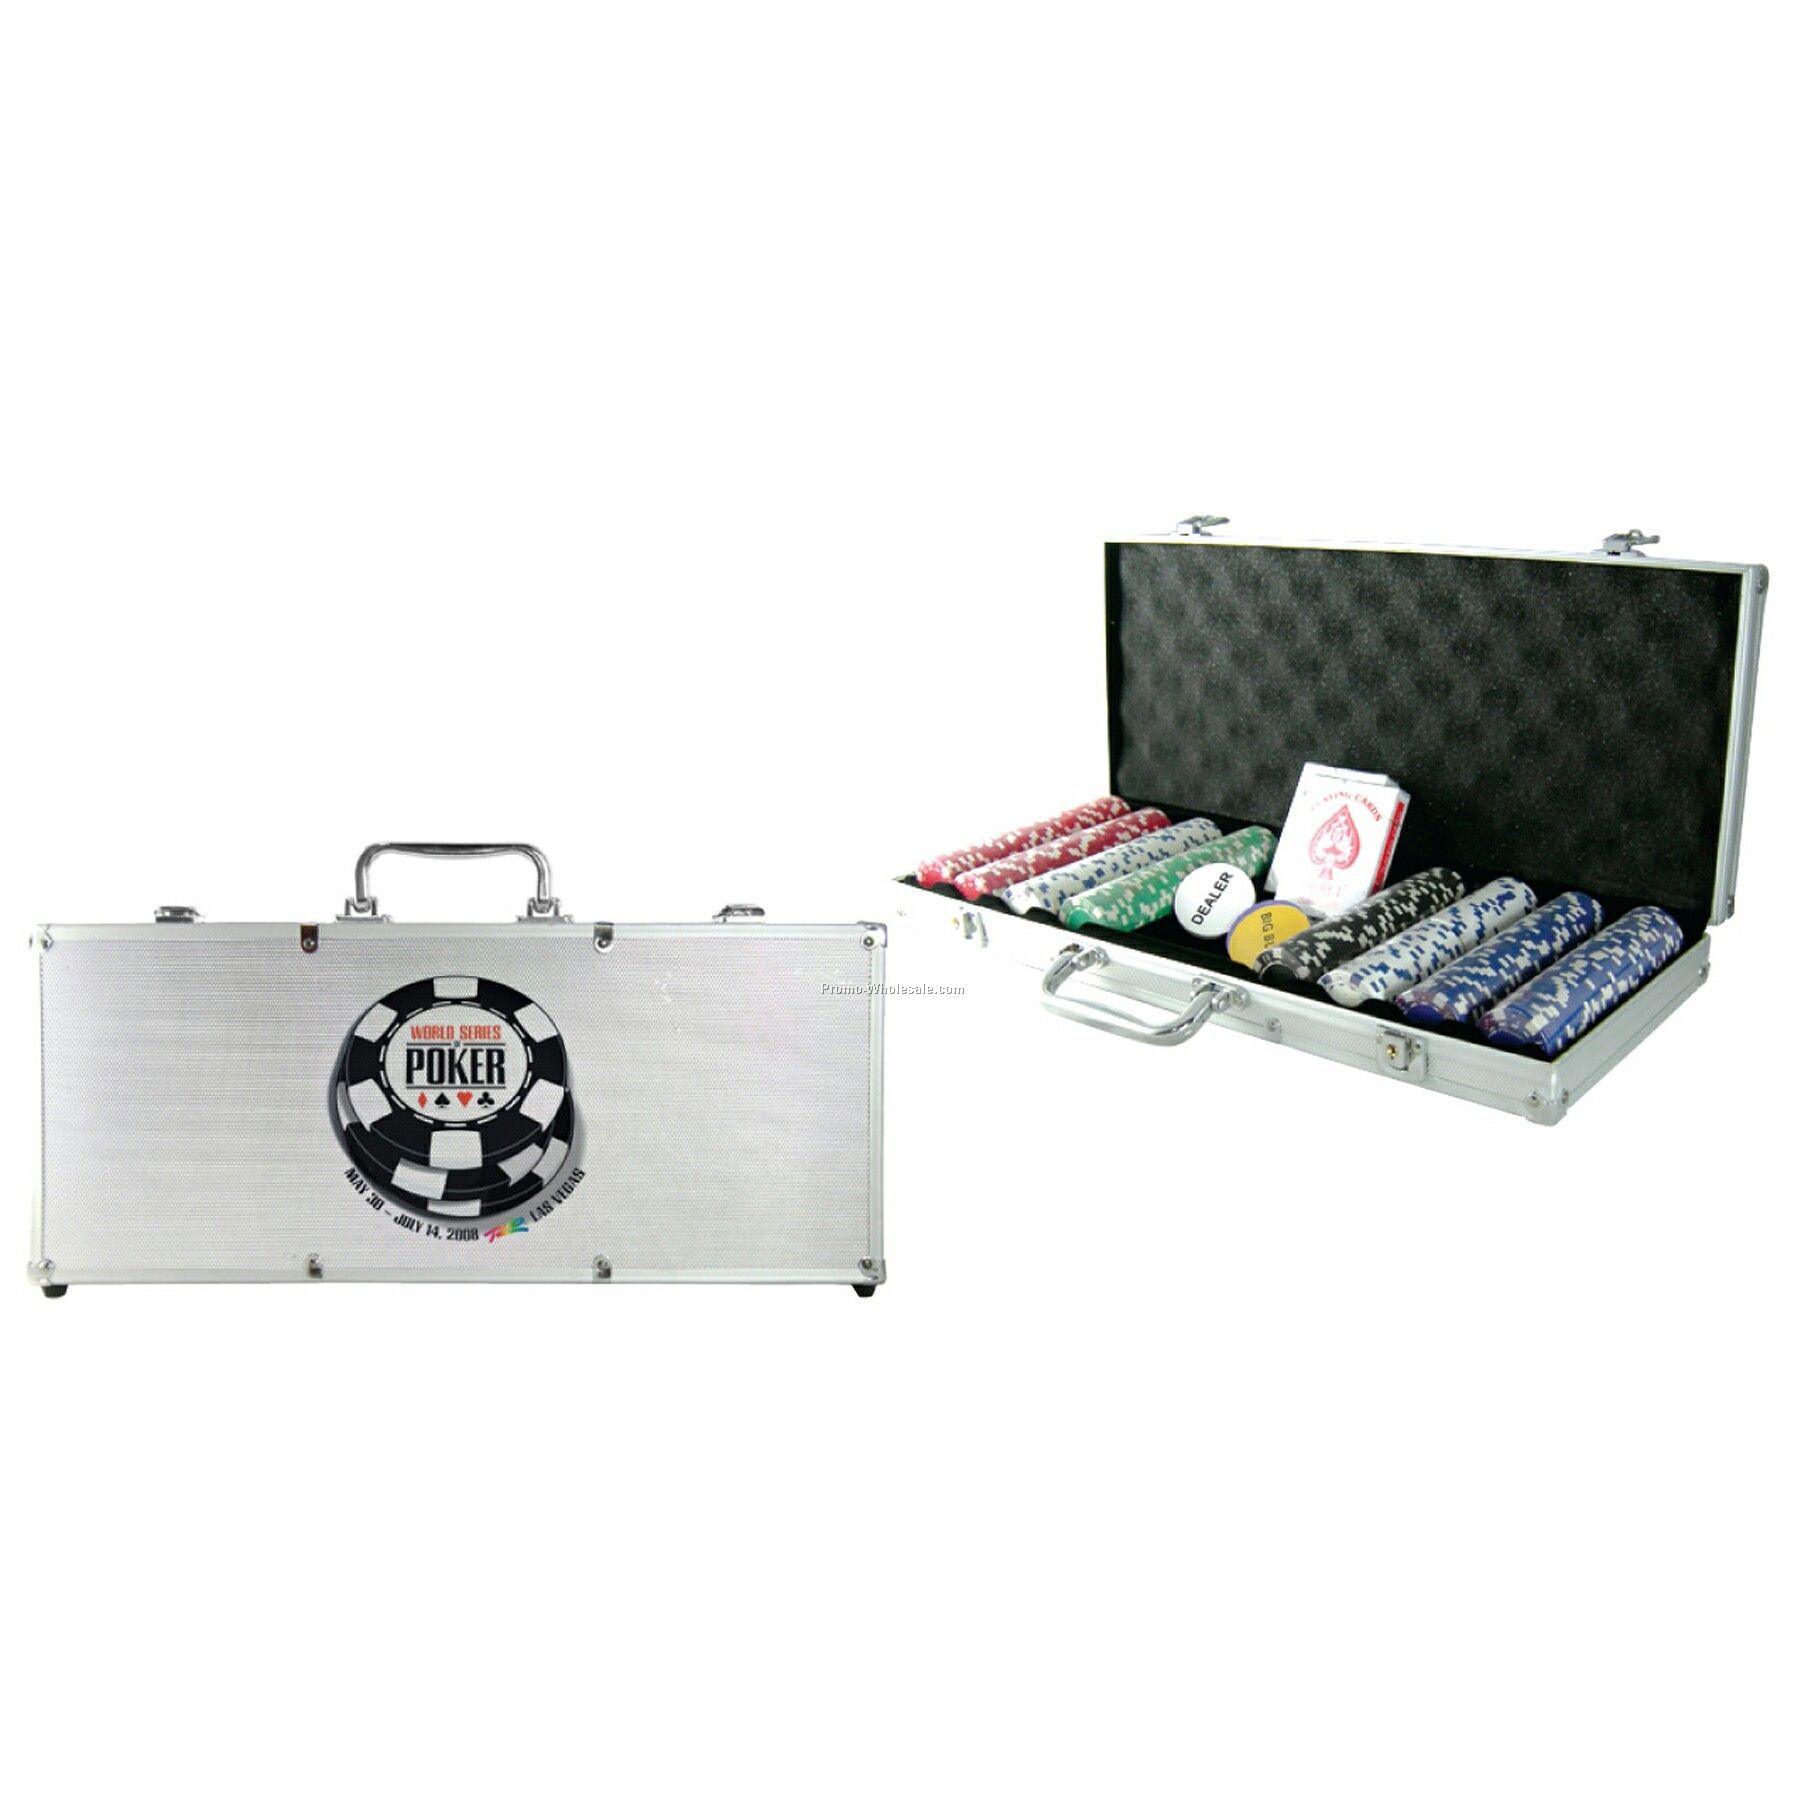 400 Piece Poker Chip Set With Silver Case - Decal Chip Imprint